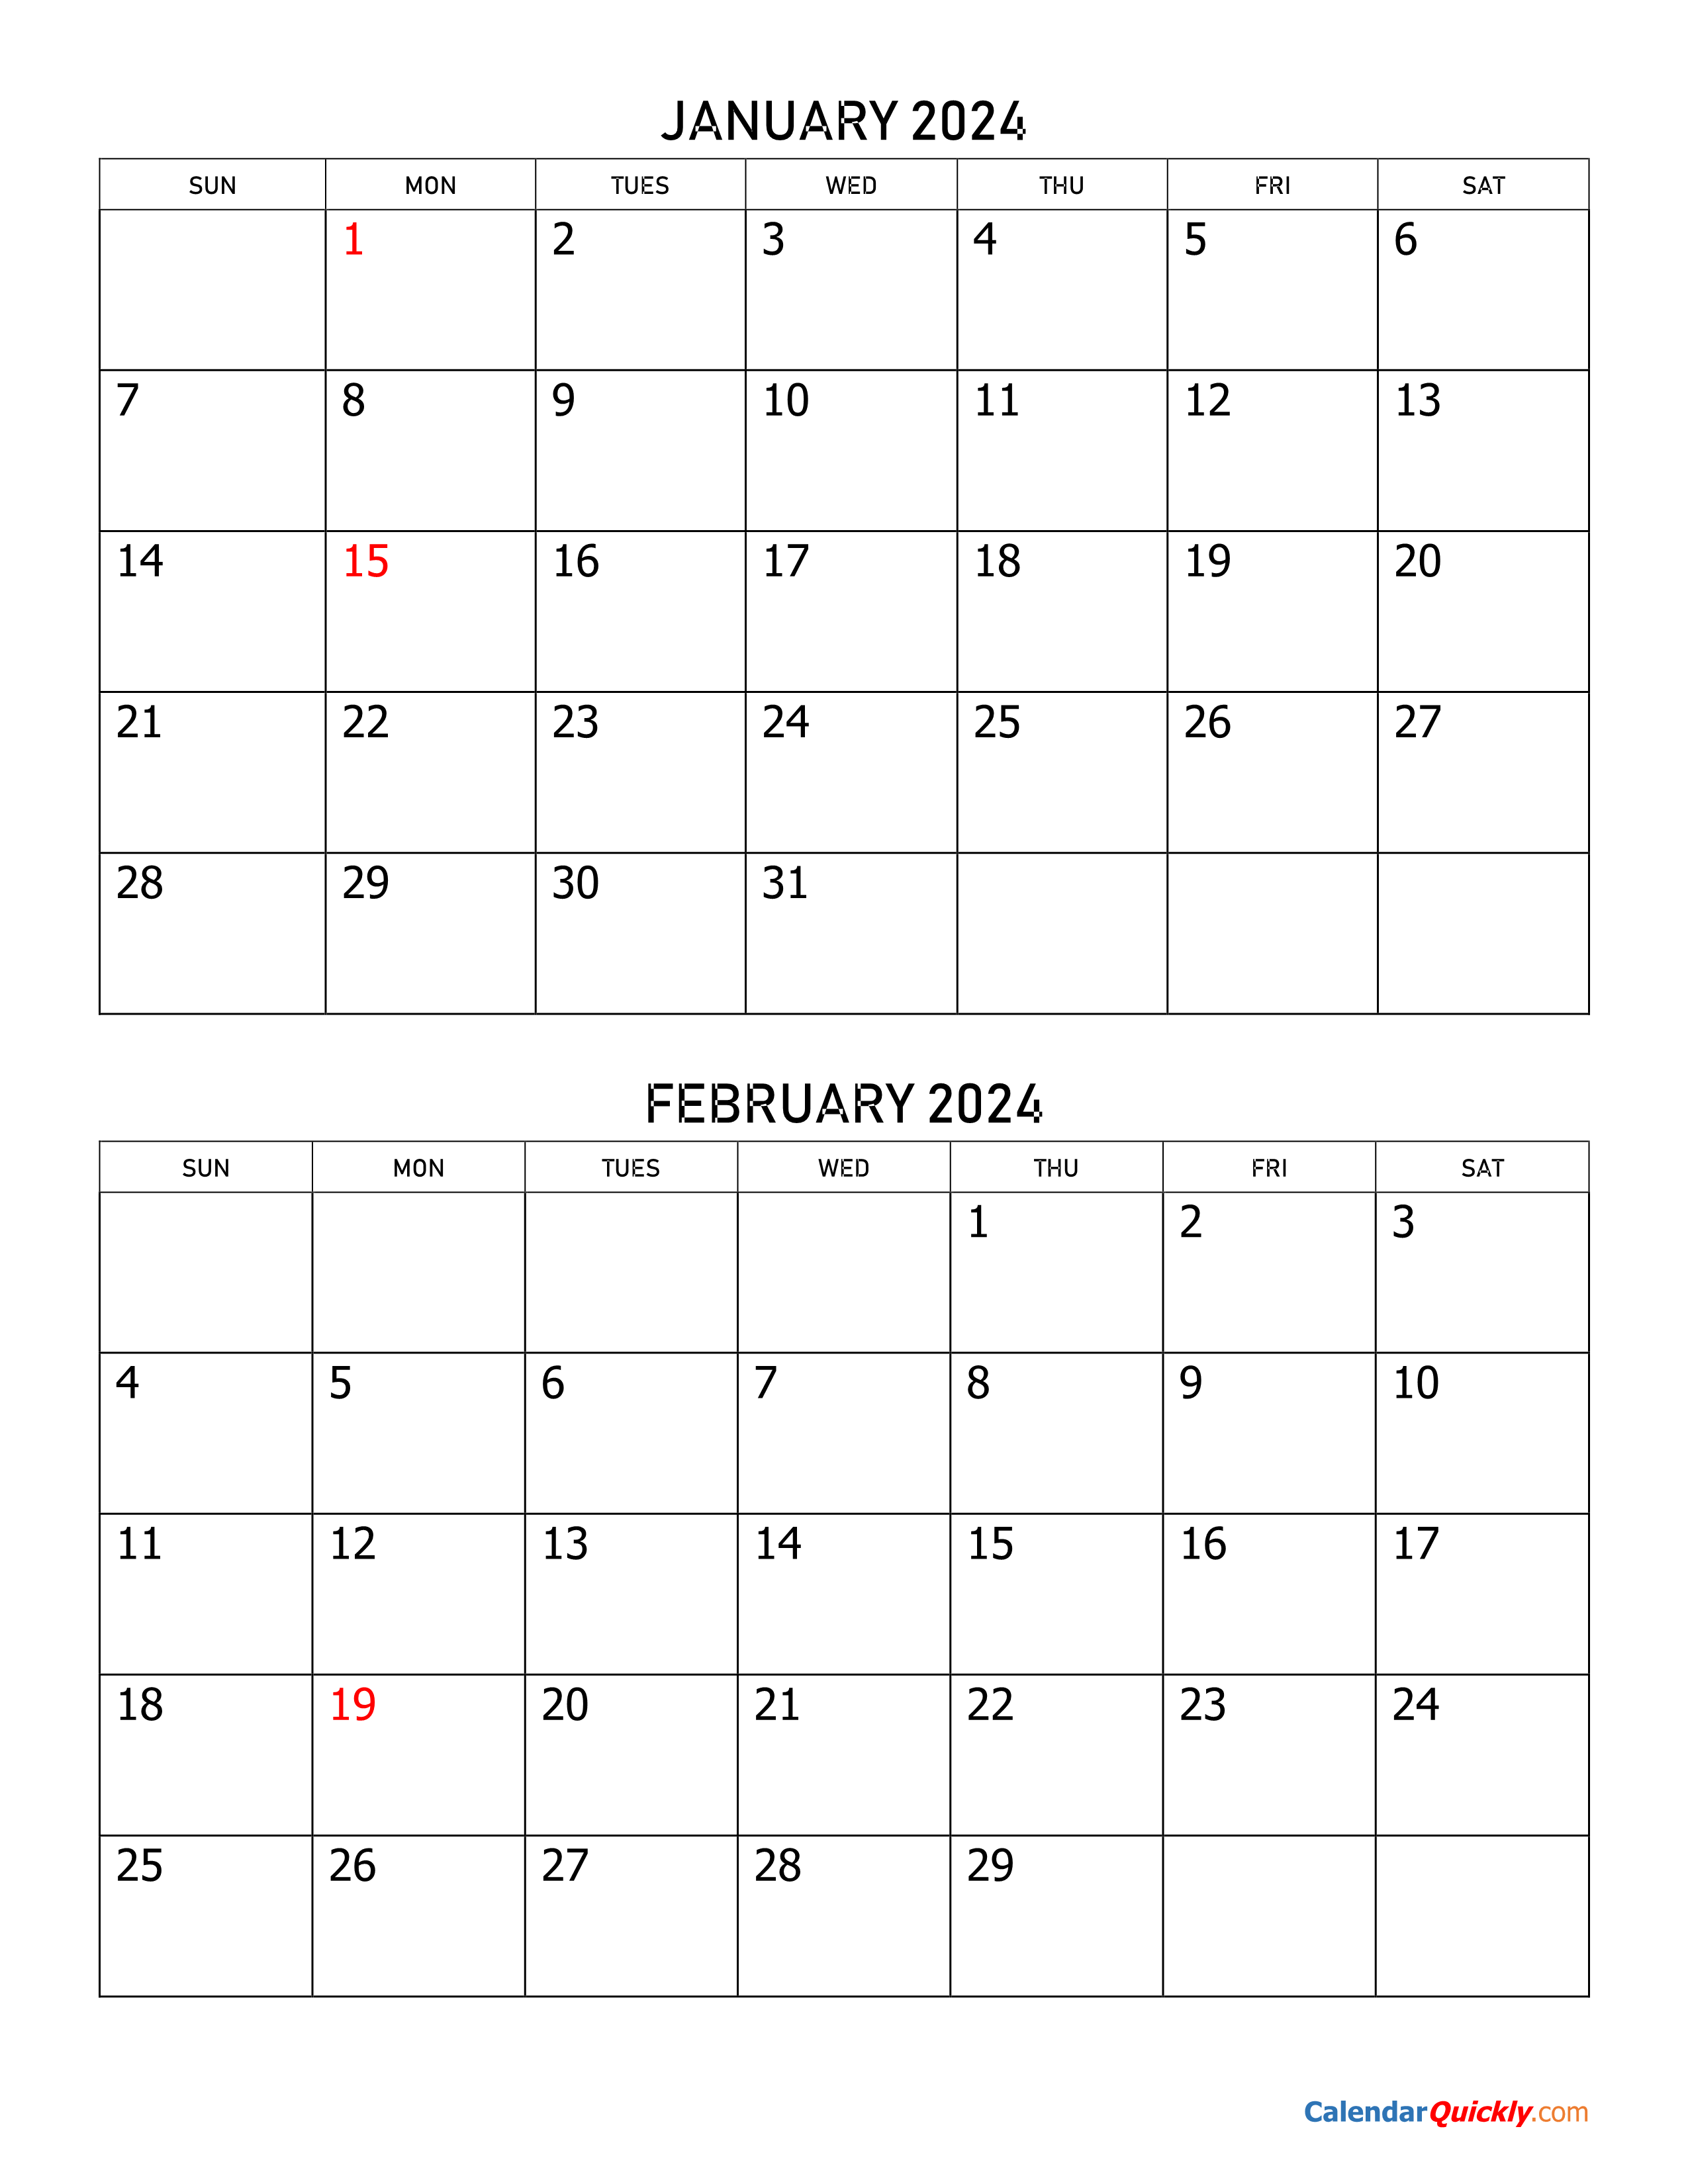 2024 Monthly Calendar To Print 2 Months On A Page Per Jany Roanne - Free Printable 2 Month Per Page Calendar 2024